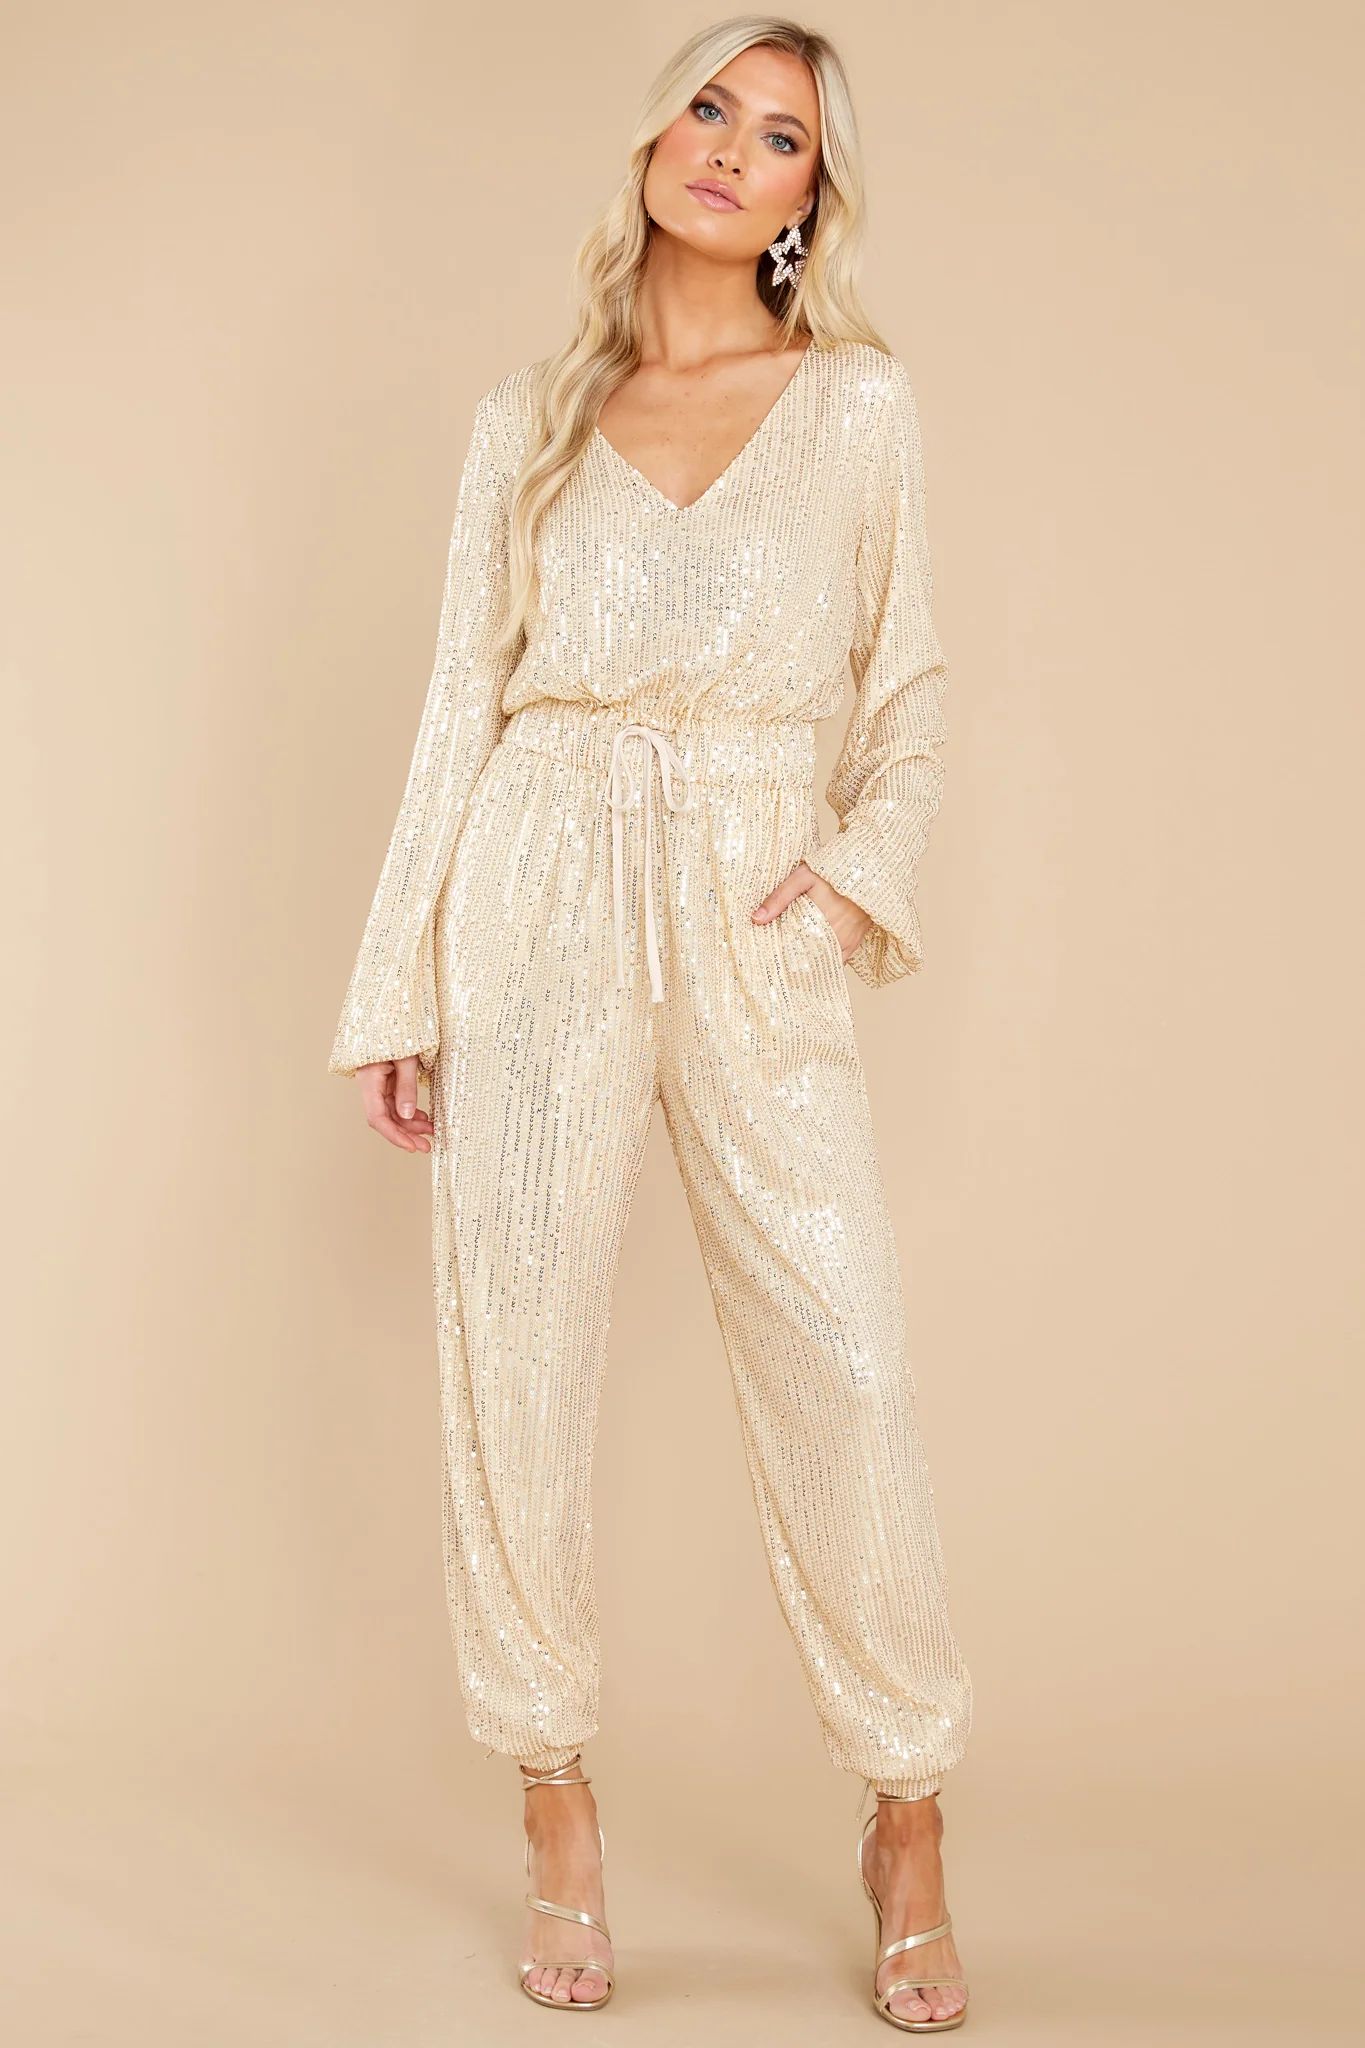 In The Stars Champagne Sequin Jumpsuit | Red Dress 